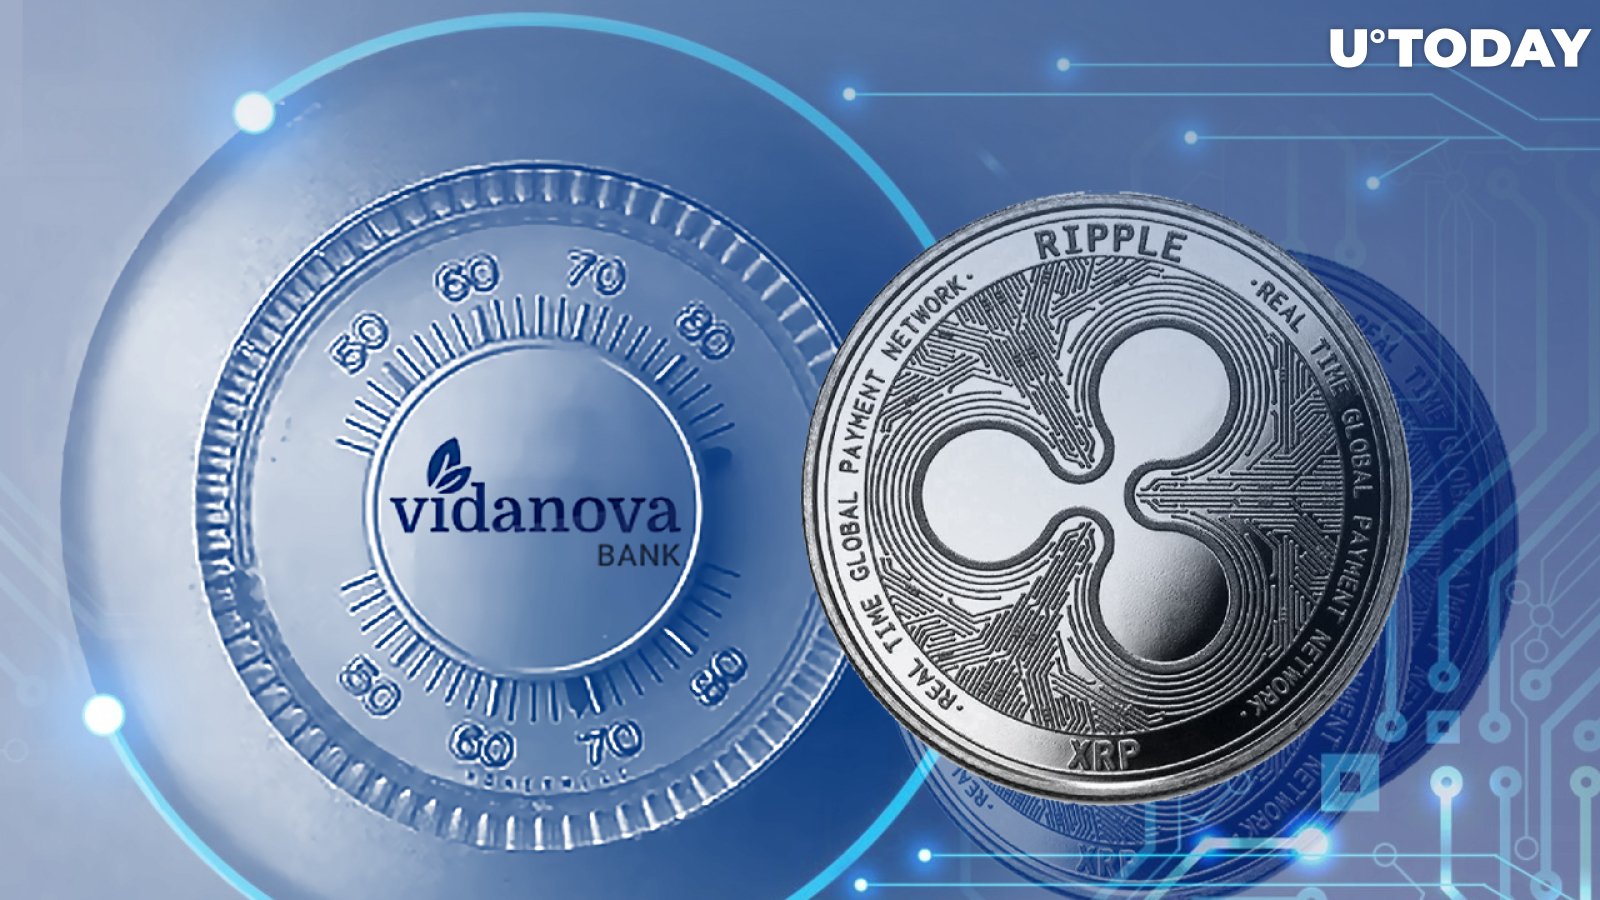 RippleNet Is "Actively" Utilized by Curacao's Top Bank, Vidanova